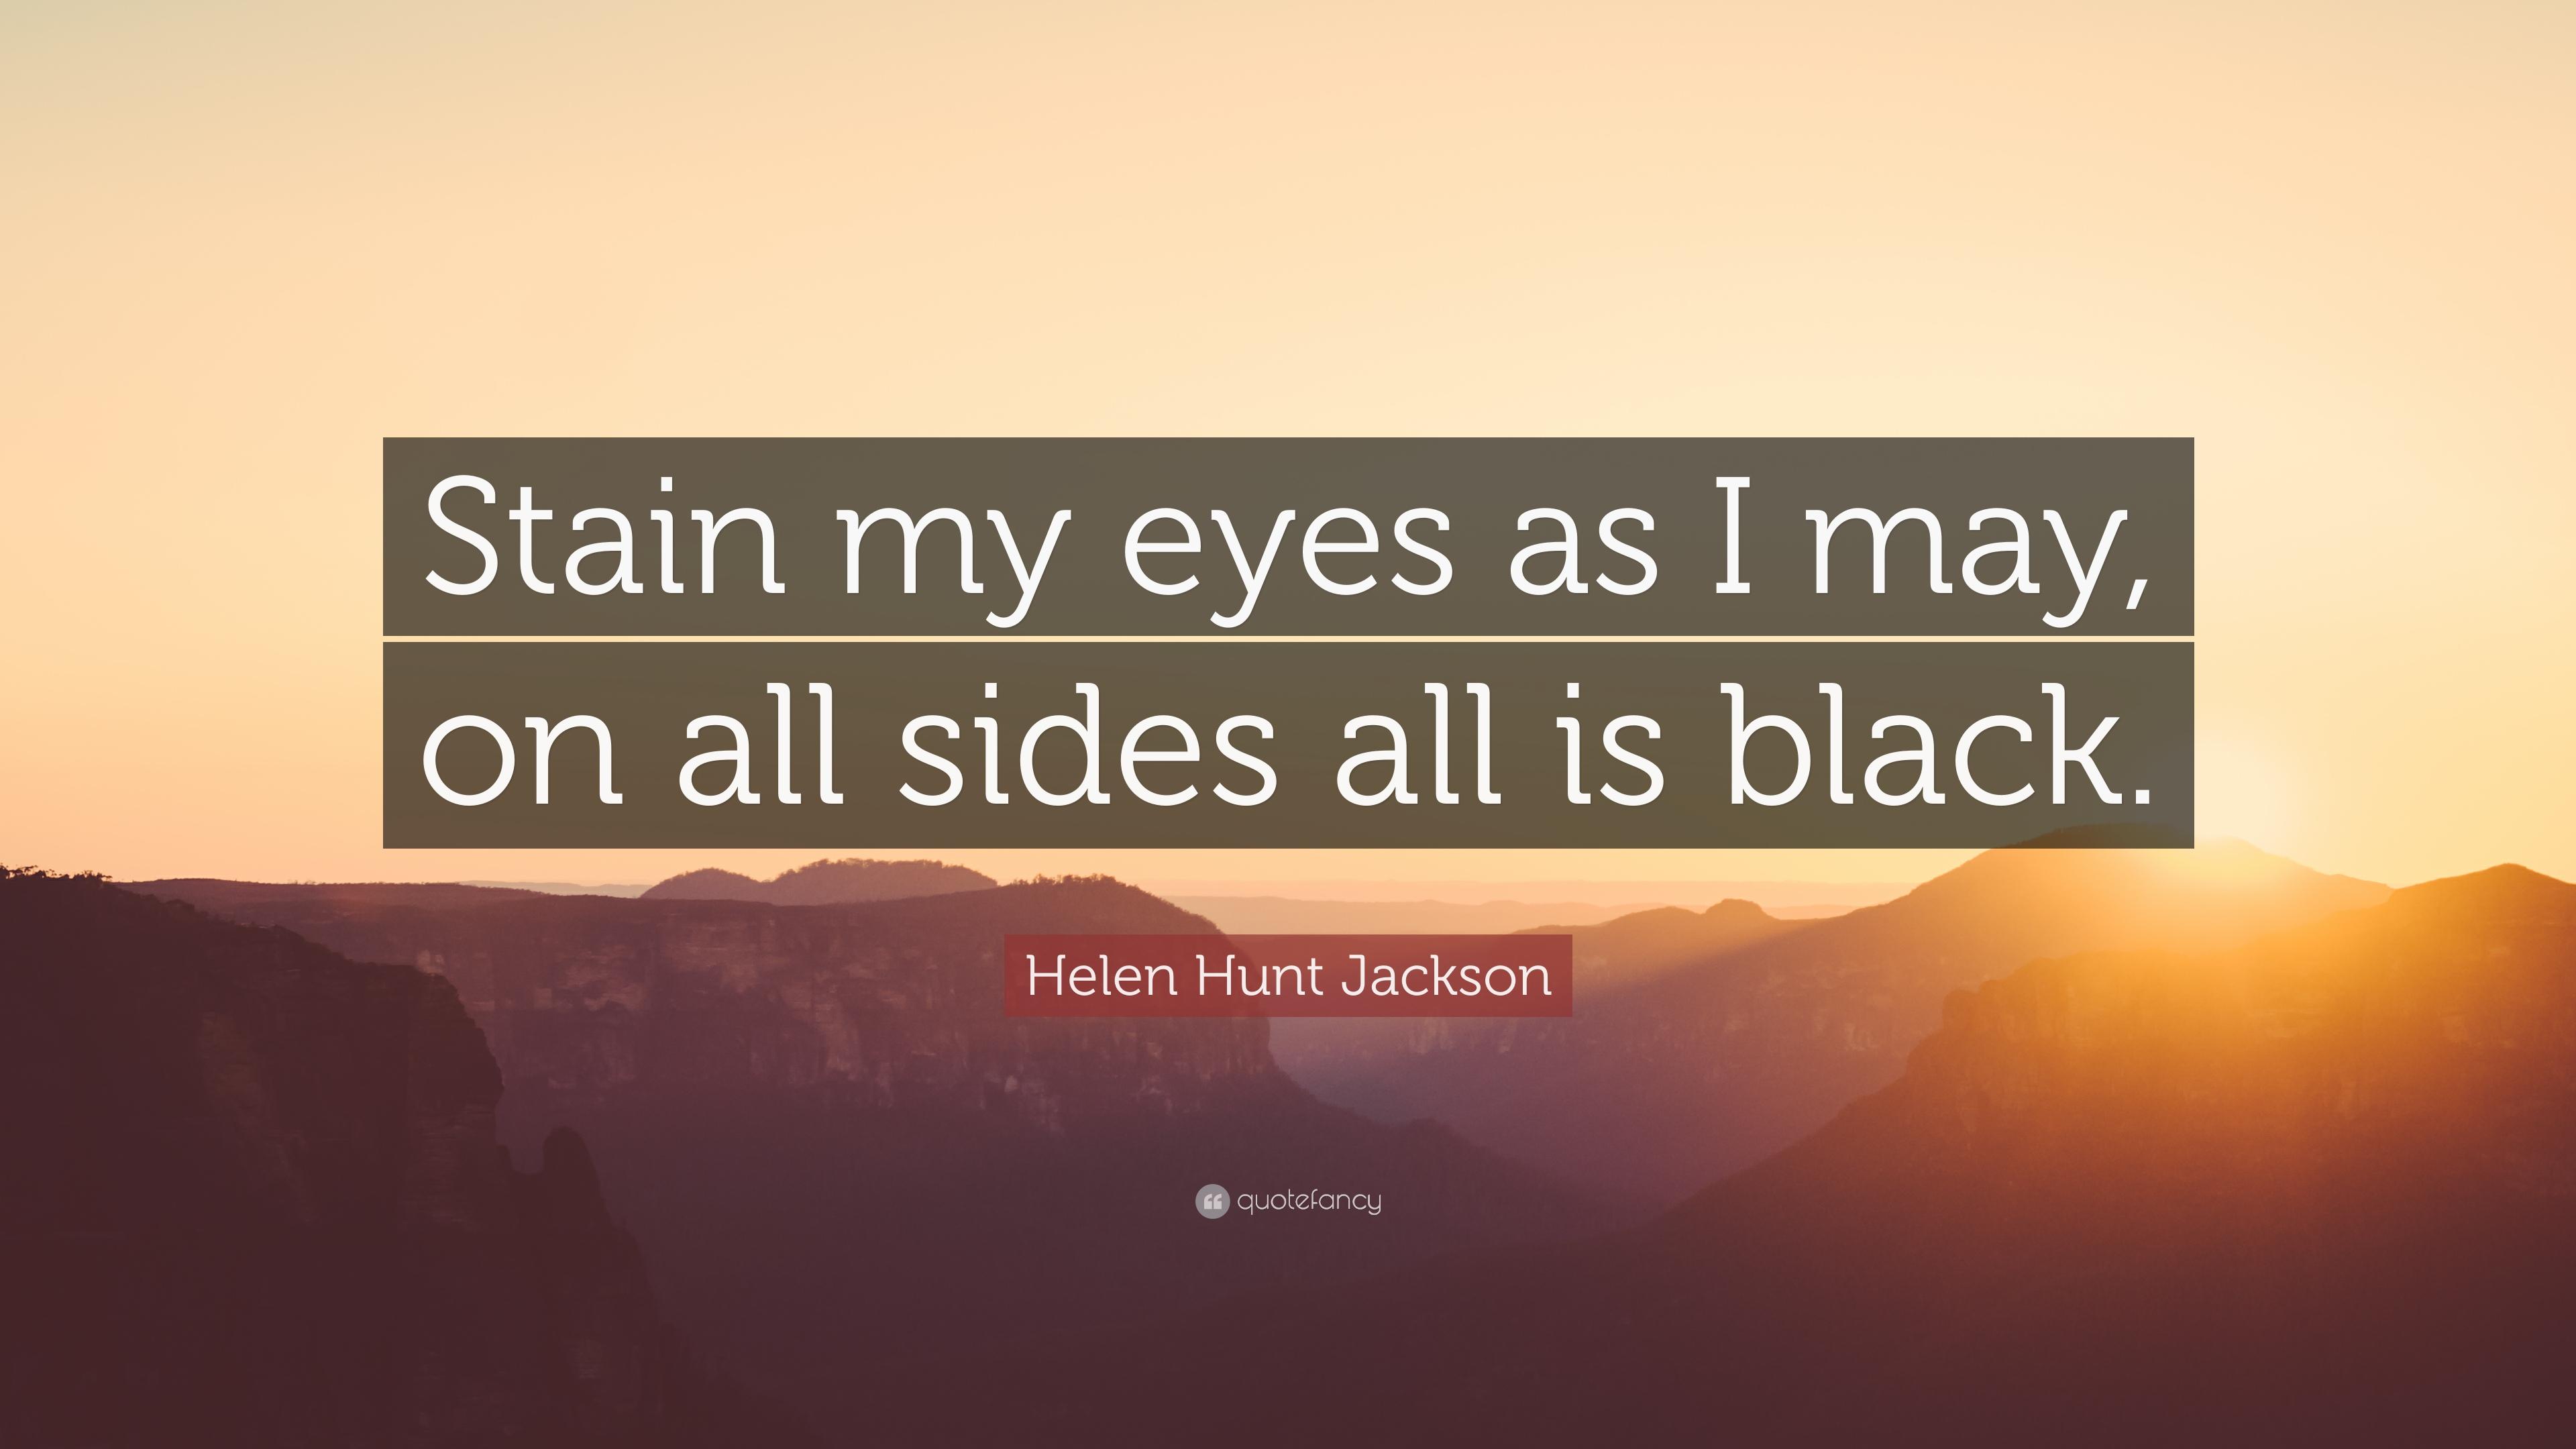 Helen Hunt Jackson Quote: “Stain my eyes as I may, on all sides all